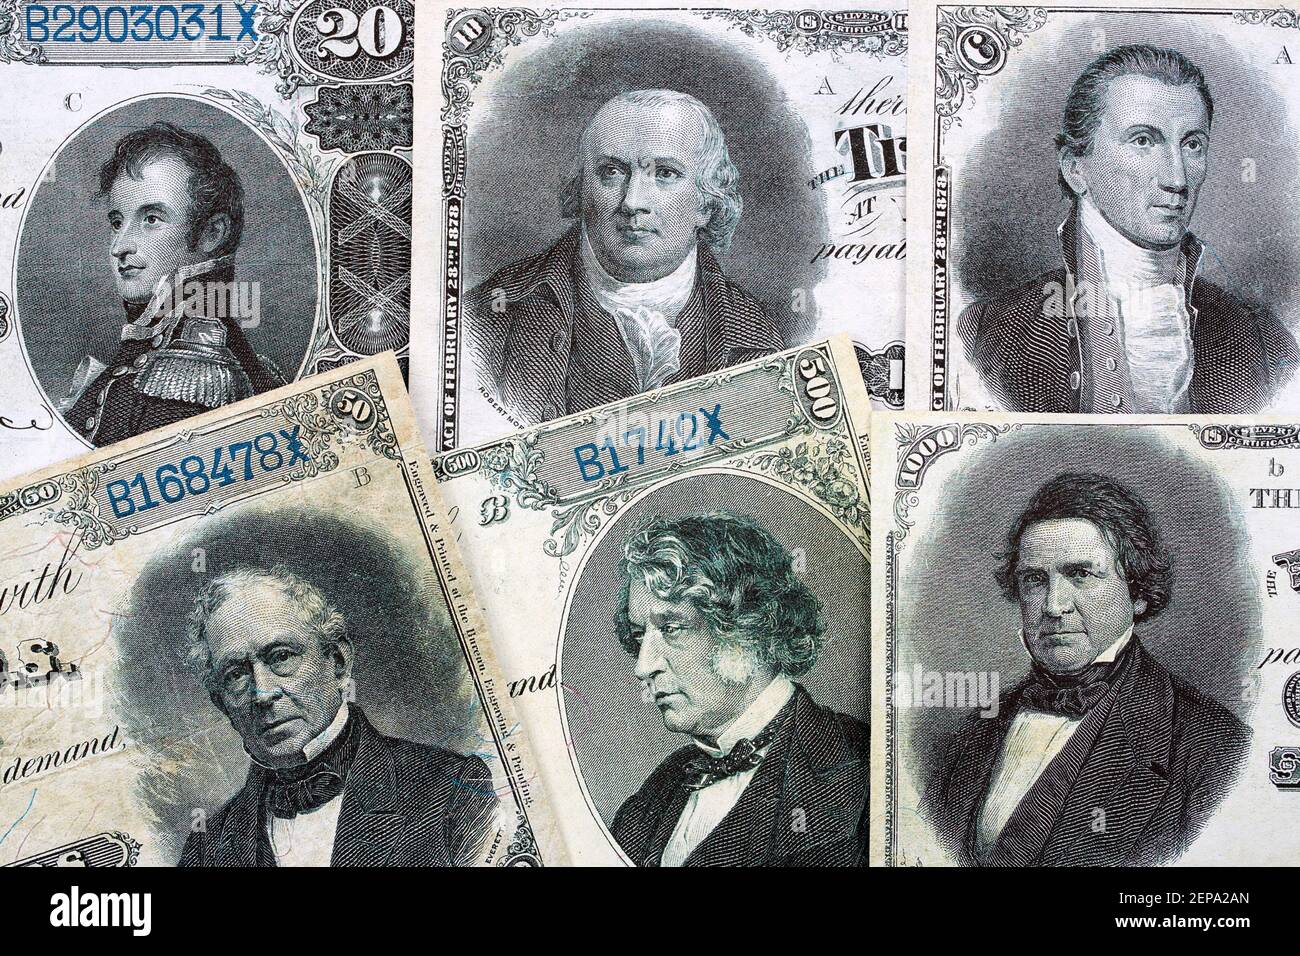 Silver Certificates - USA currency issued in 1880 Stock Photo